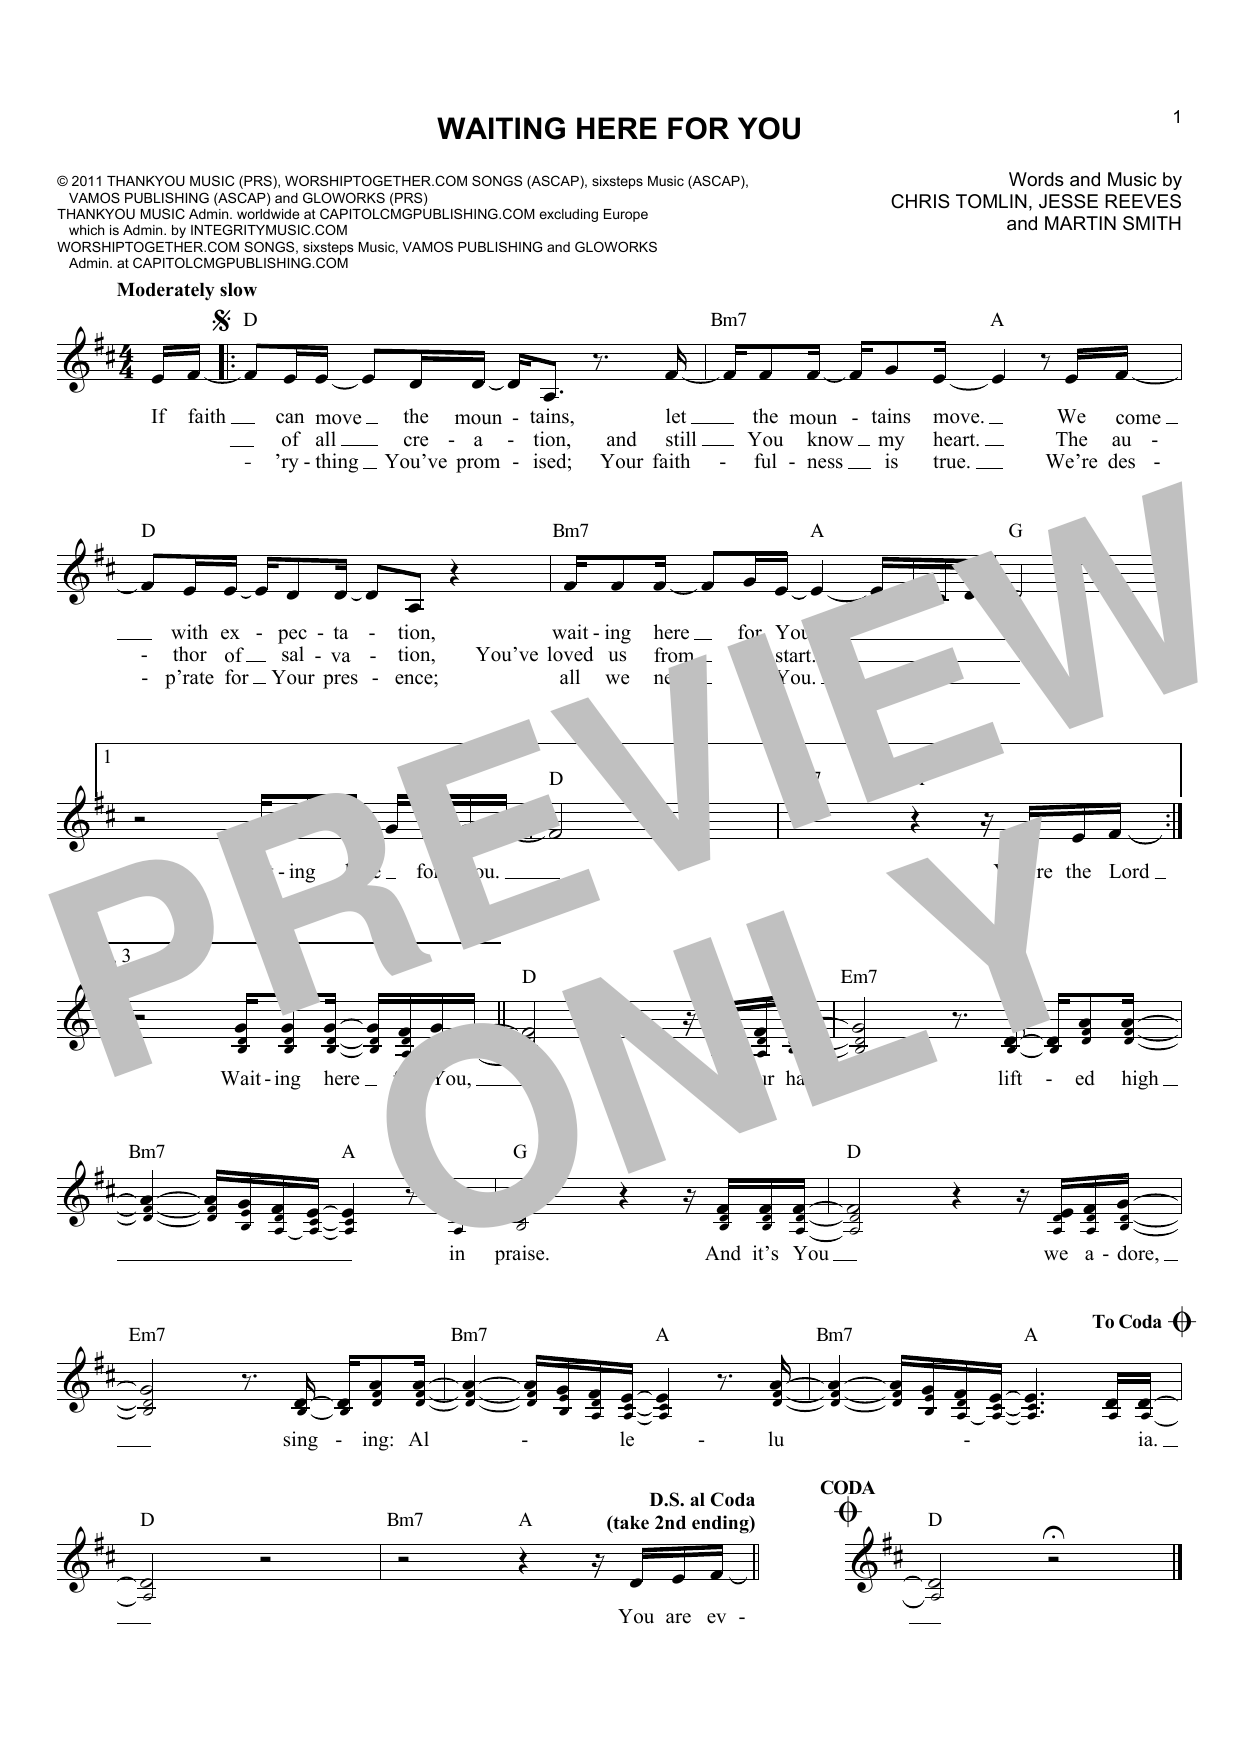 Download Passion Waiting Here For You Sheet Music